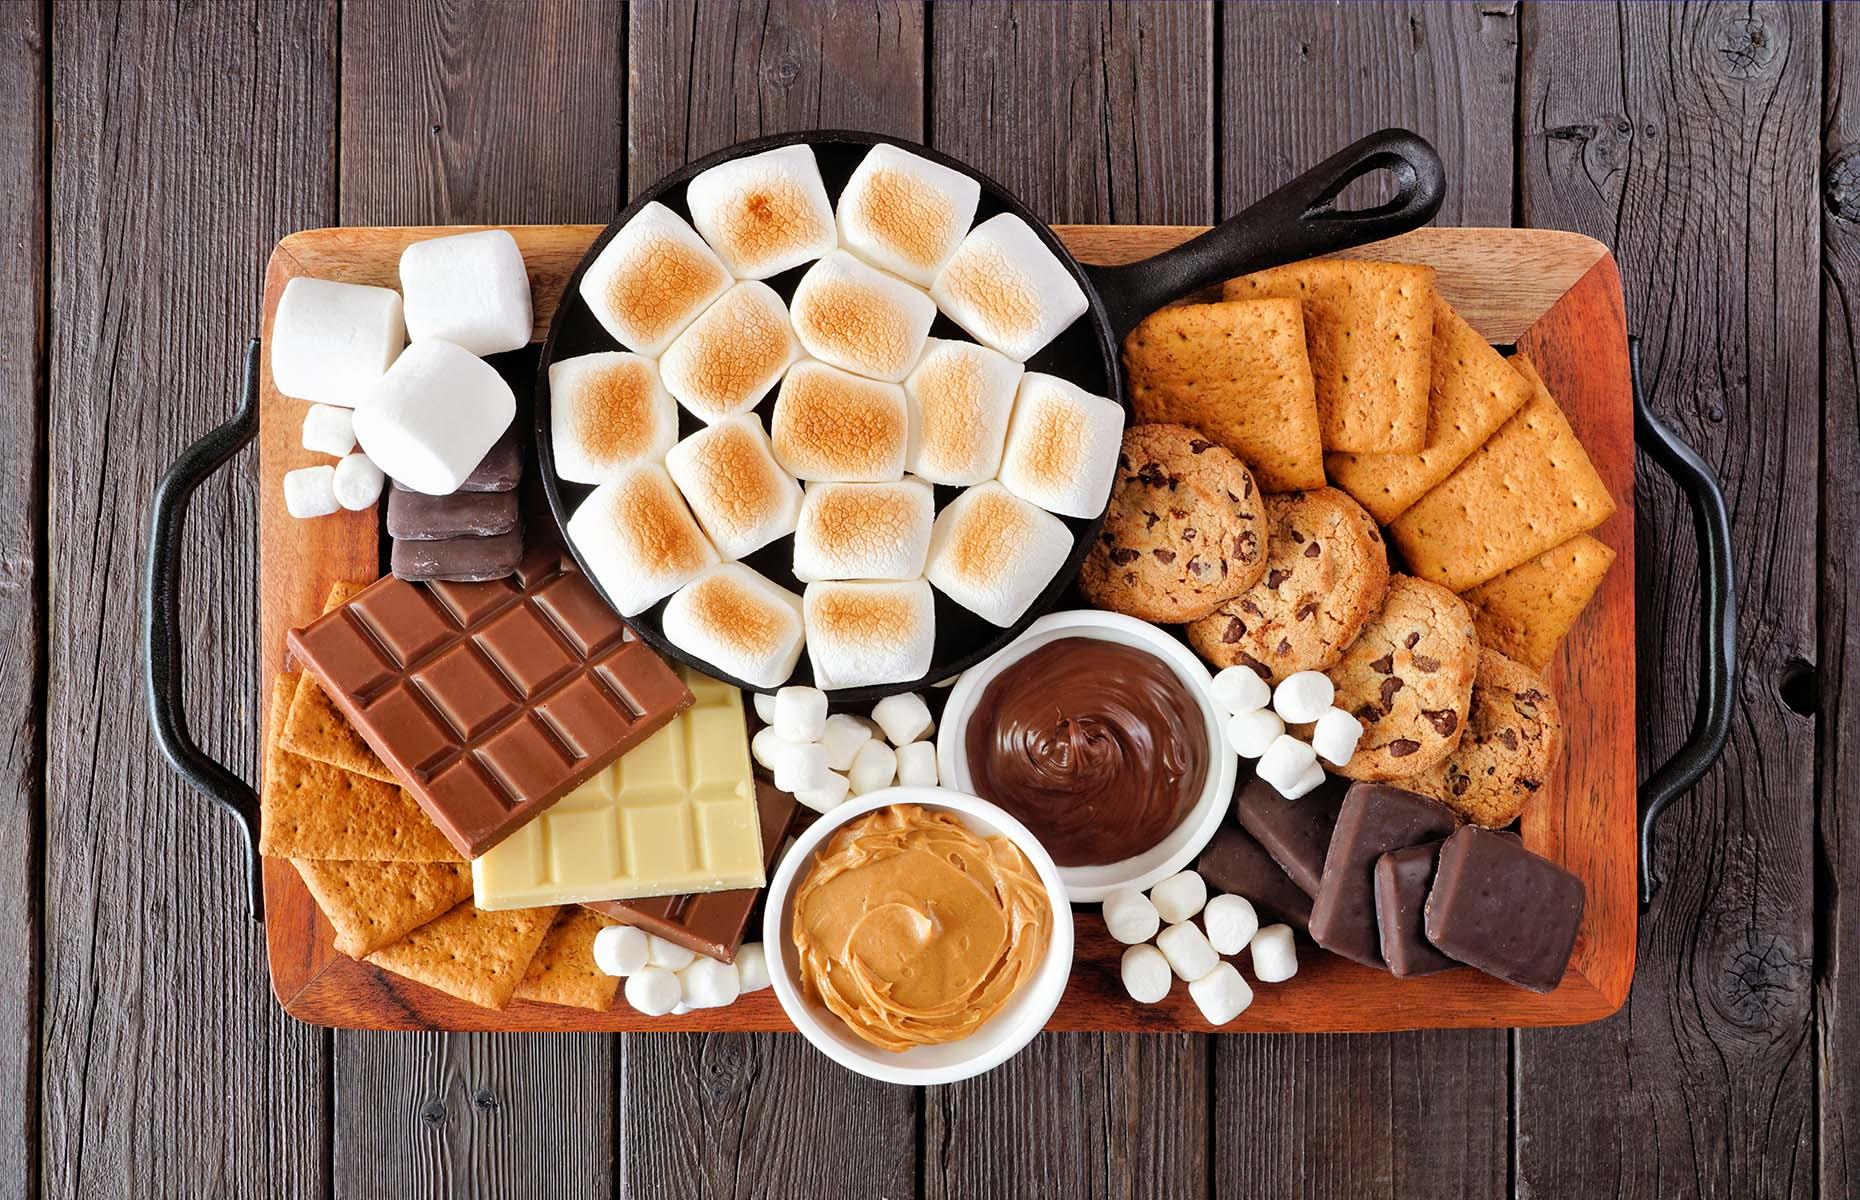 <p>If you've got a sweet tooth, try this grazing board take on an all-American classic dessert. To make it, arrange pots of melted chocolate, graham crackers, and your favourite chocolate bars and biscuits around a selection of baked or torched marshmallows. To get the marshmallows nice and gooey, simply pop them in a small cast-iron pan or cocotte, and place them in a hot oven for a few minutes. Want to make your board extra special? Go all-out by preparing your own flavored marshmallows.</p>  <p><a href="https://www.lovefood.com/recipes/59607/cherry-and-poppy-seed-marshmallows-recipe"><strong>Get the recipe for cherry and poppy seed marshmallows here</strong></a></p>